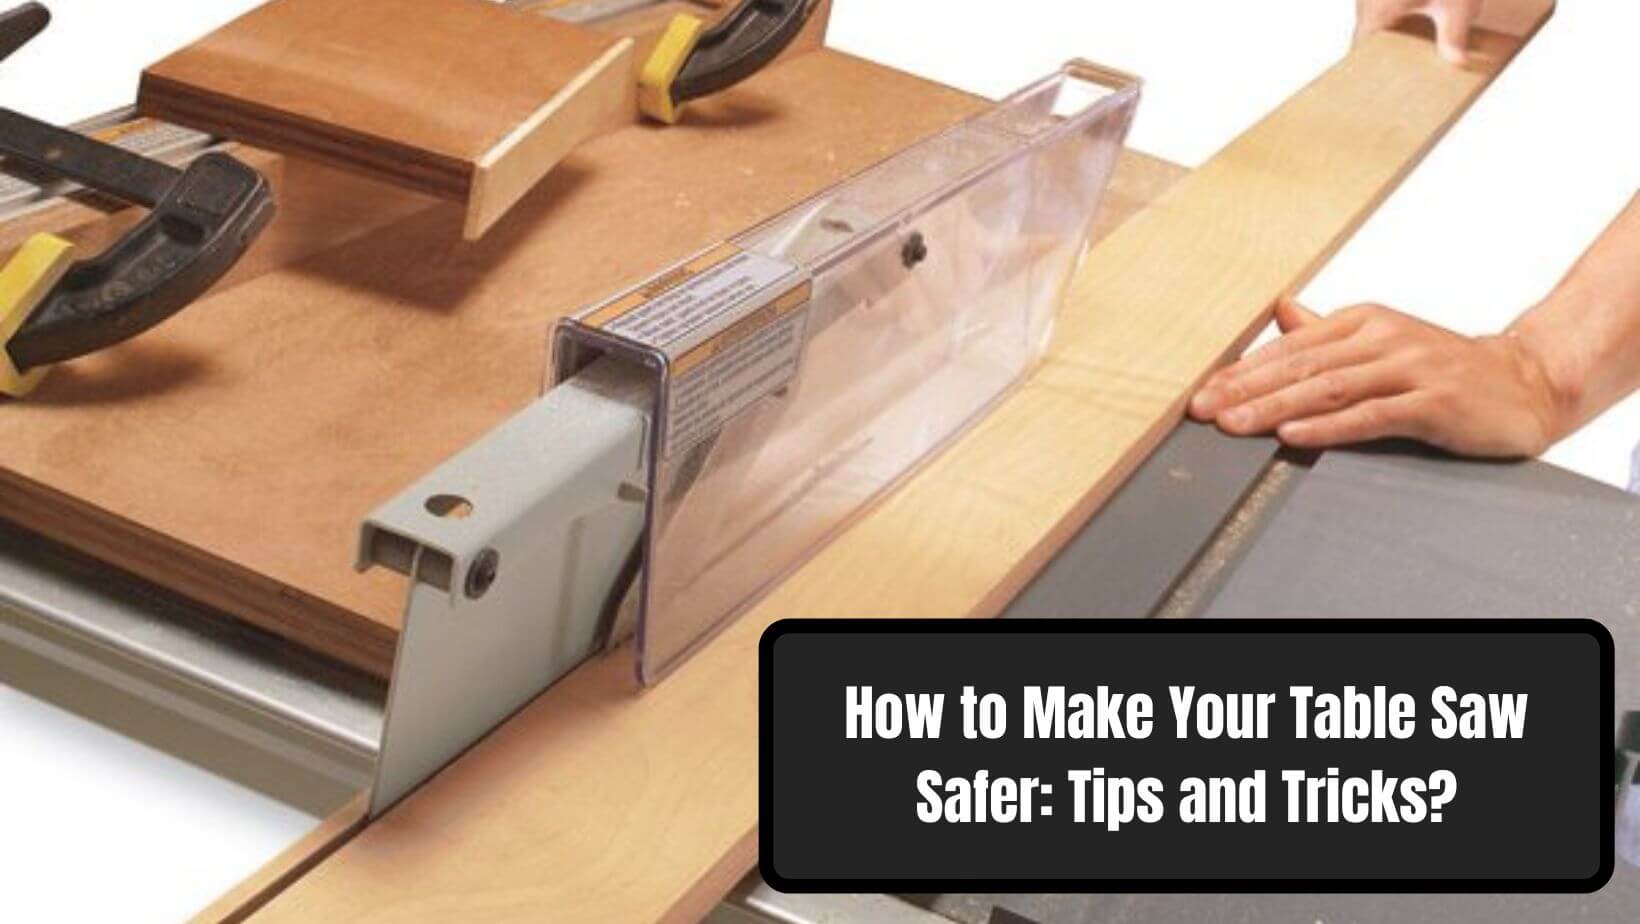 How can I make my table saw safer